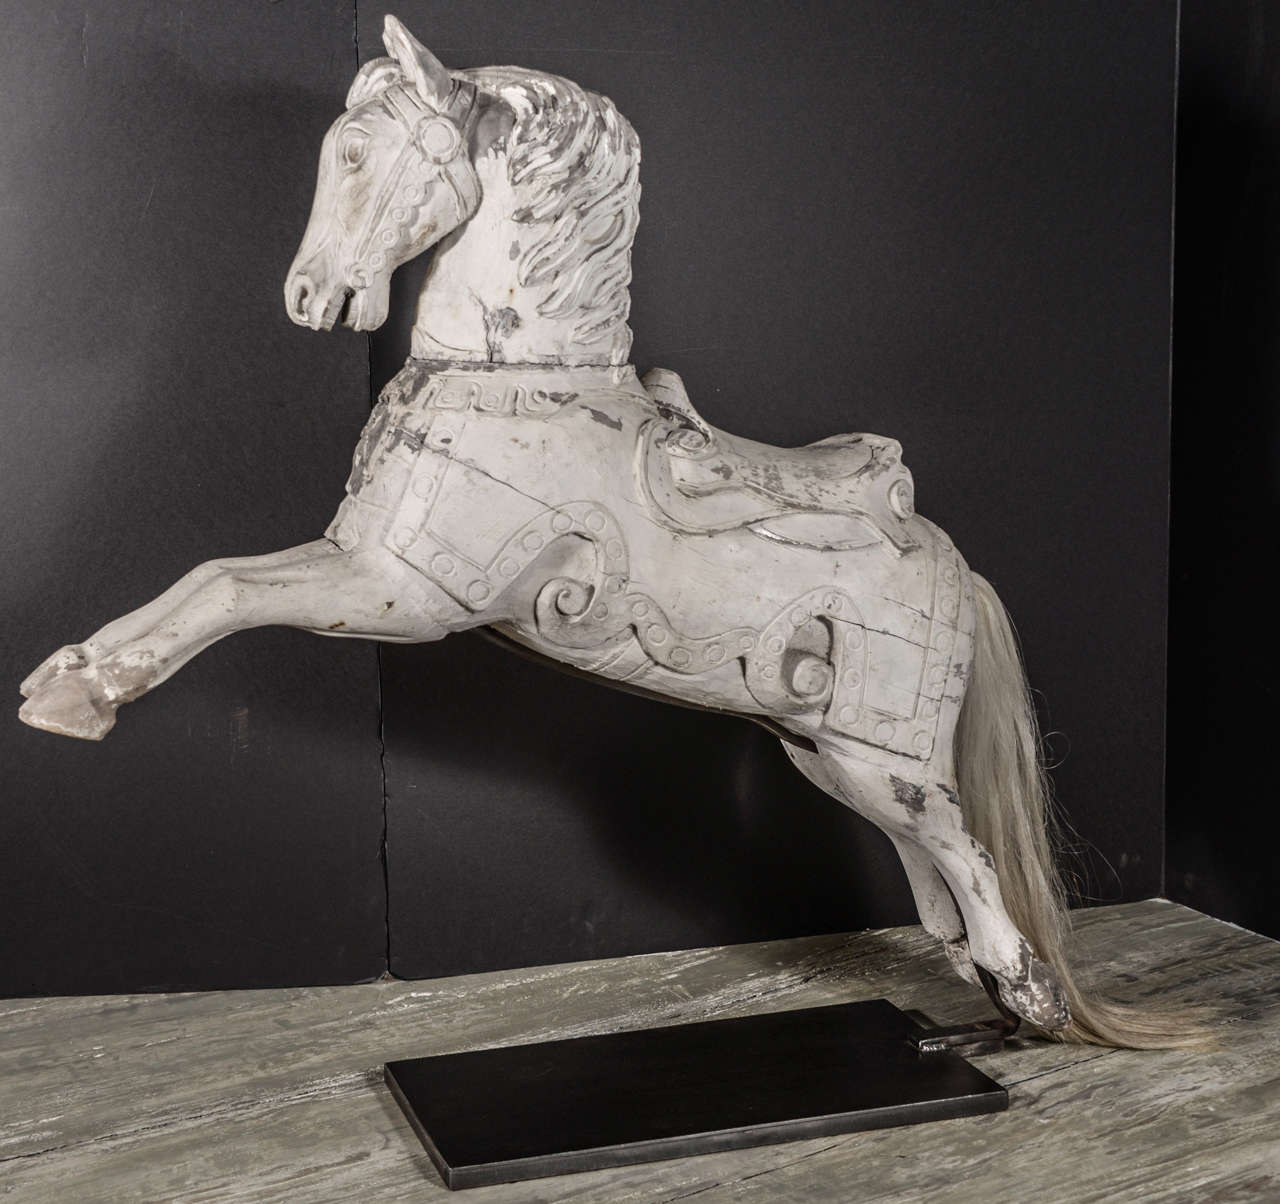 Antique white painted ‘cheval en bois,’ circa 1860-1880, mounted on custom iron stand with horse hair tail.